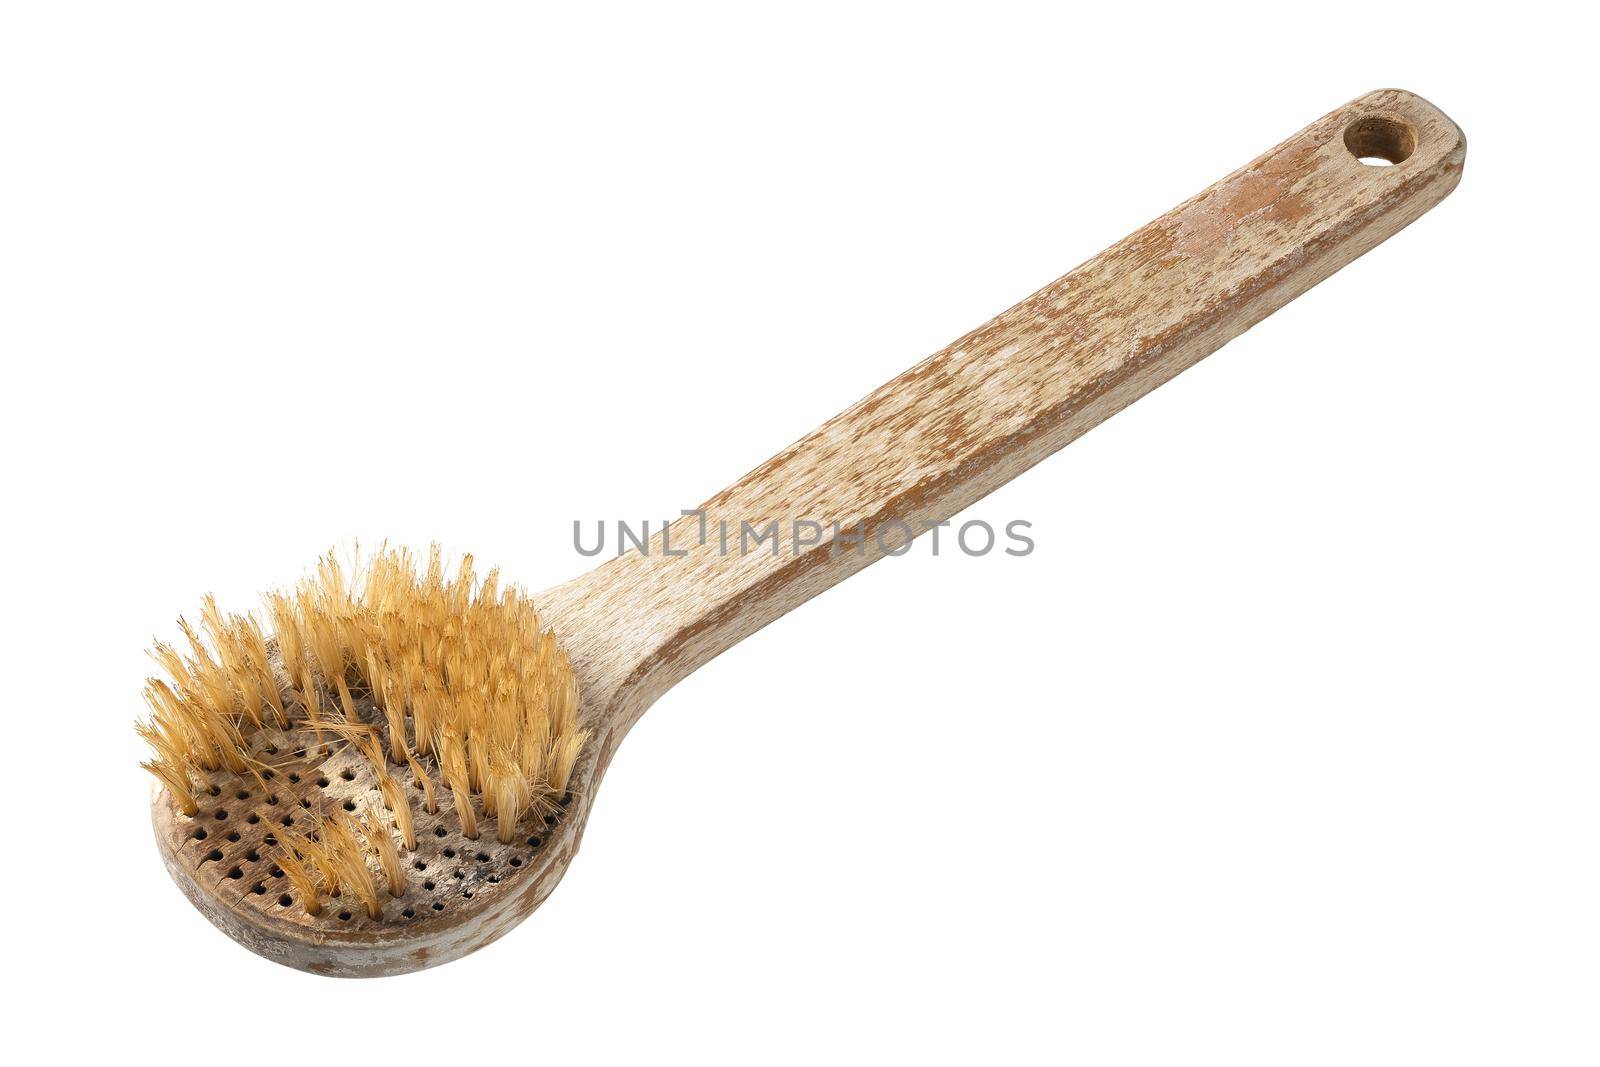 Old and dirty ruined wooden bath body brush or shower back scrubber with long handle isolated on white background, natural hair boar bristle